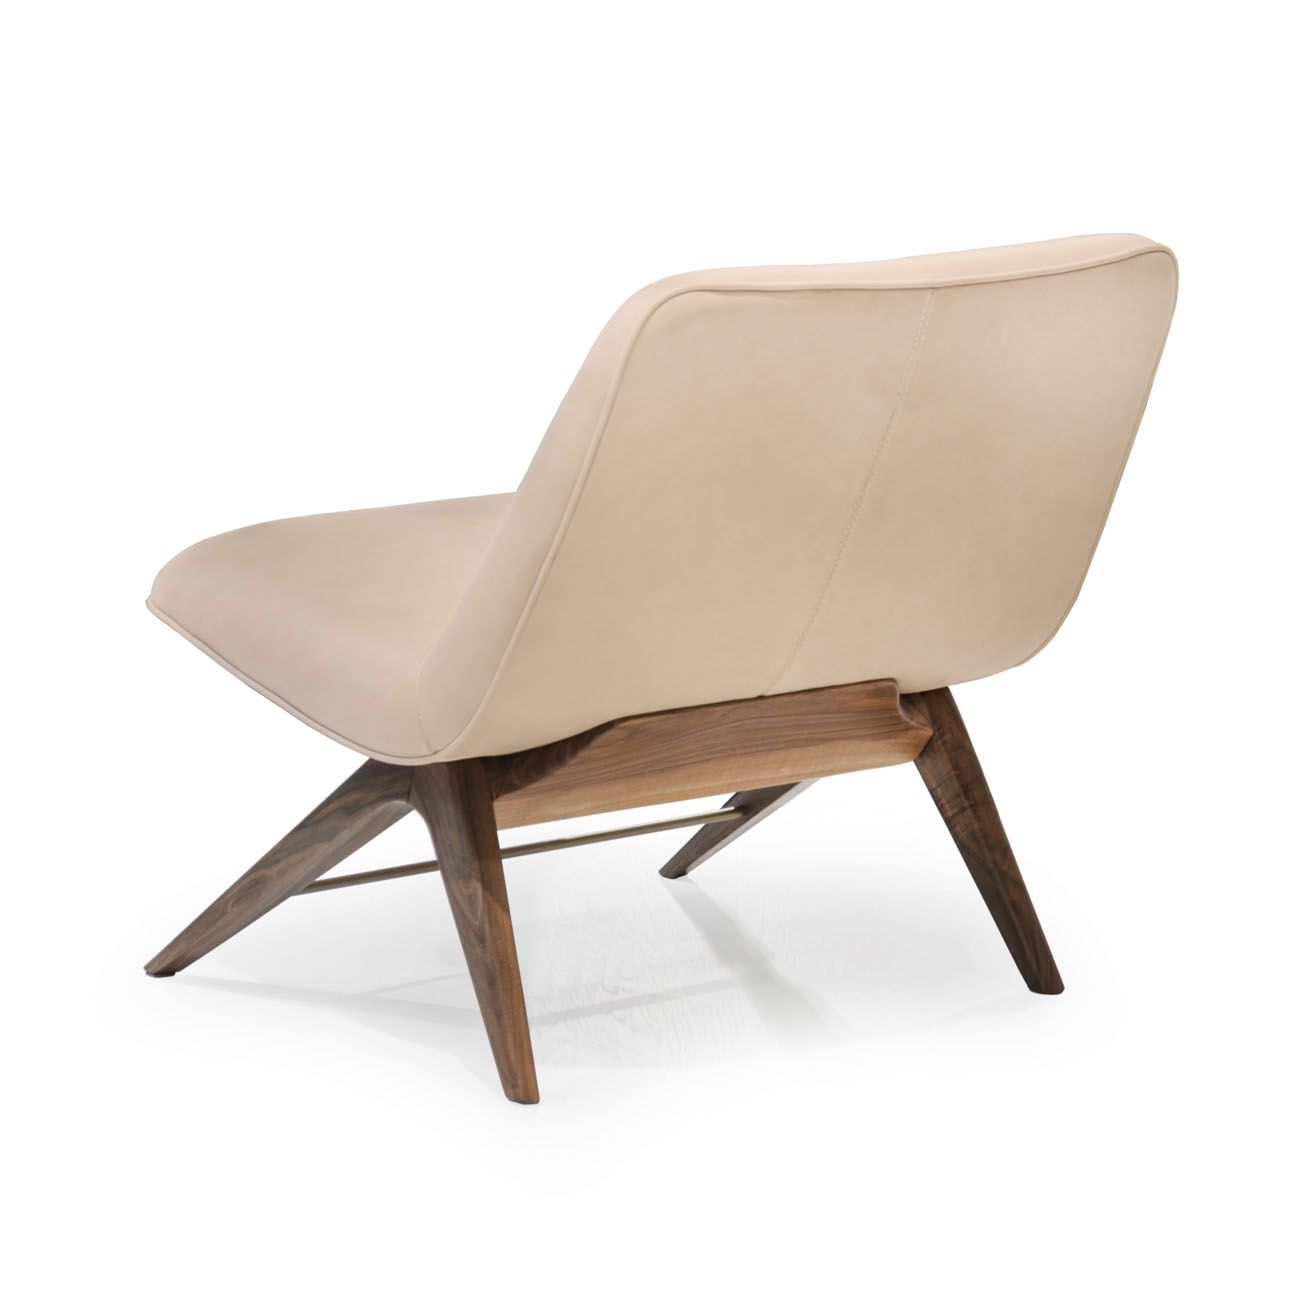 ASTON MARTIN HOME | V219 Leather Lounge Chair - $10,129.00